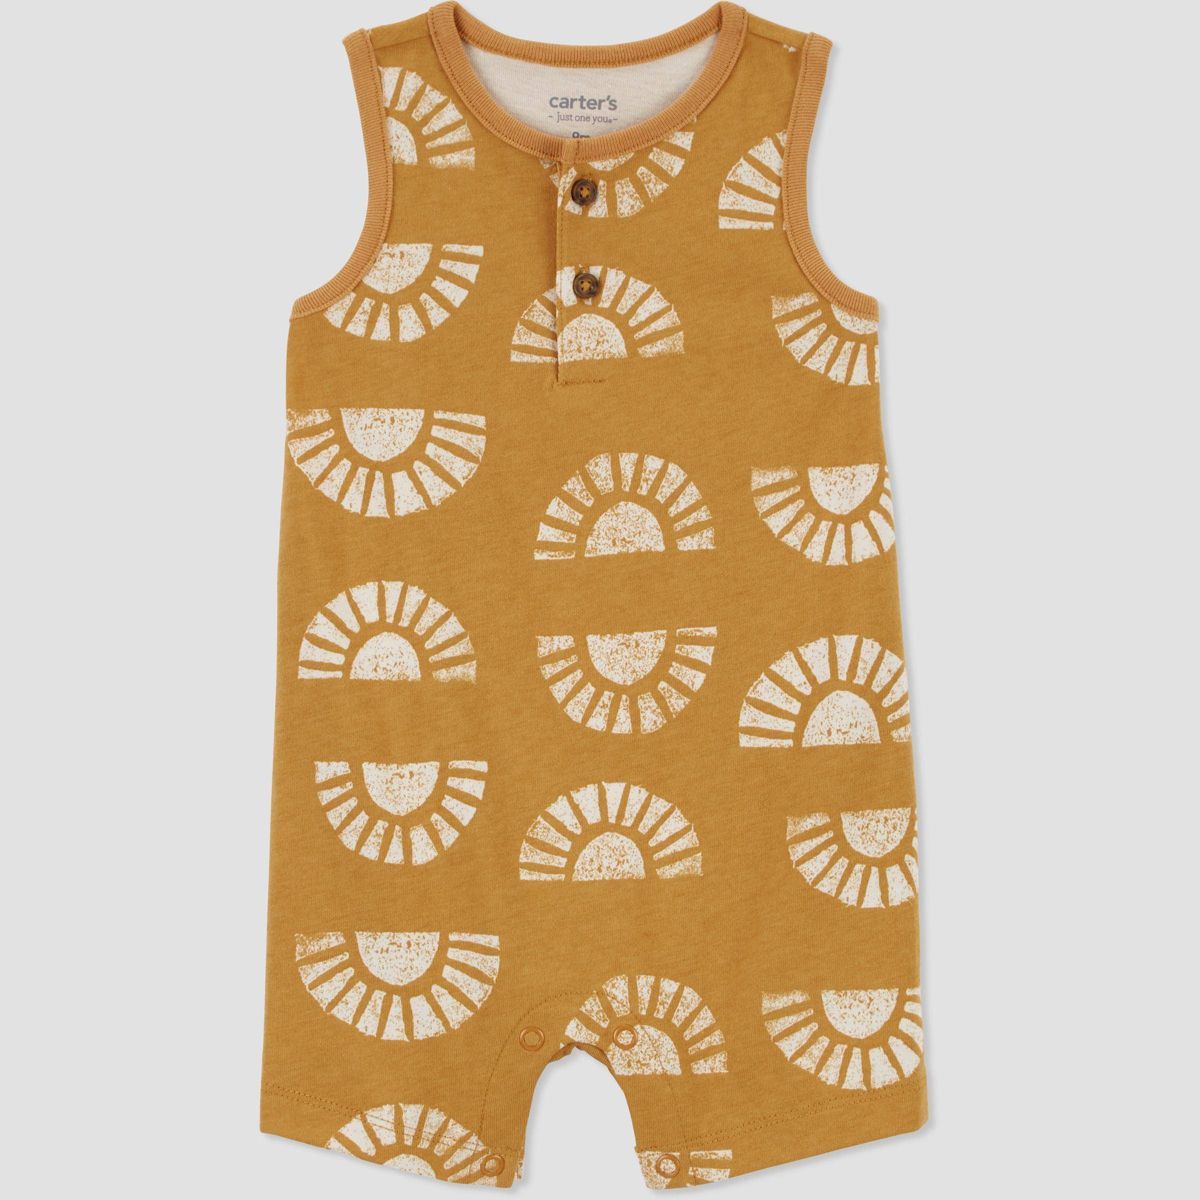 Carter's Just One You® Baby Boys' Sunrise Romper - Brown/White 12M | Target